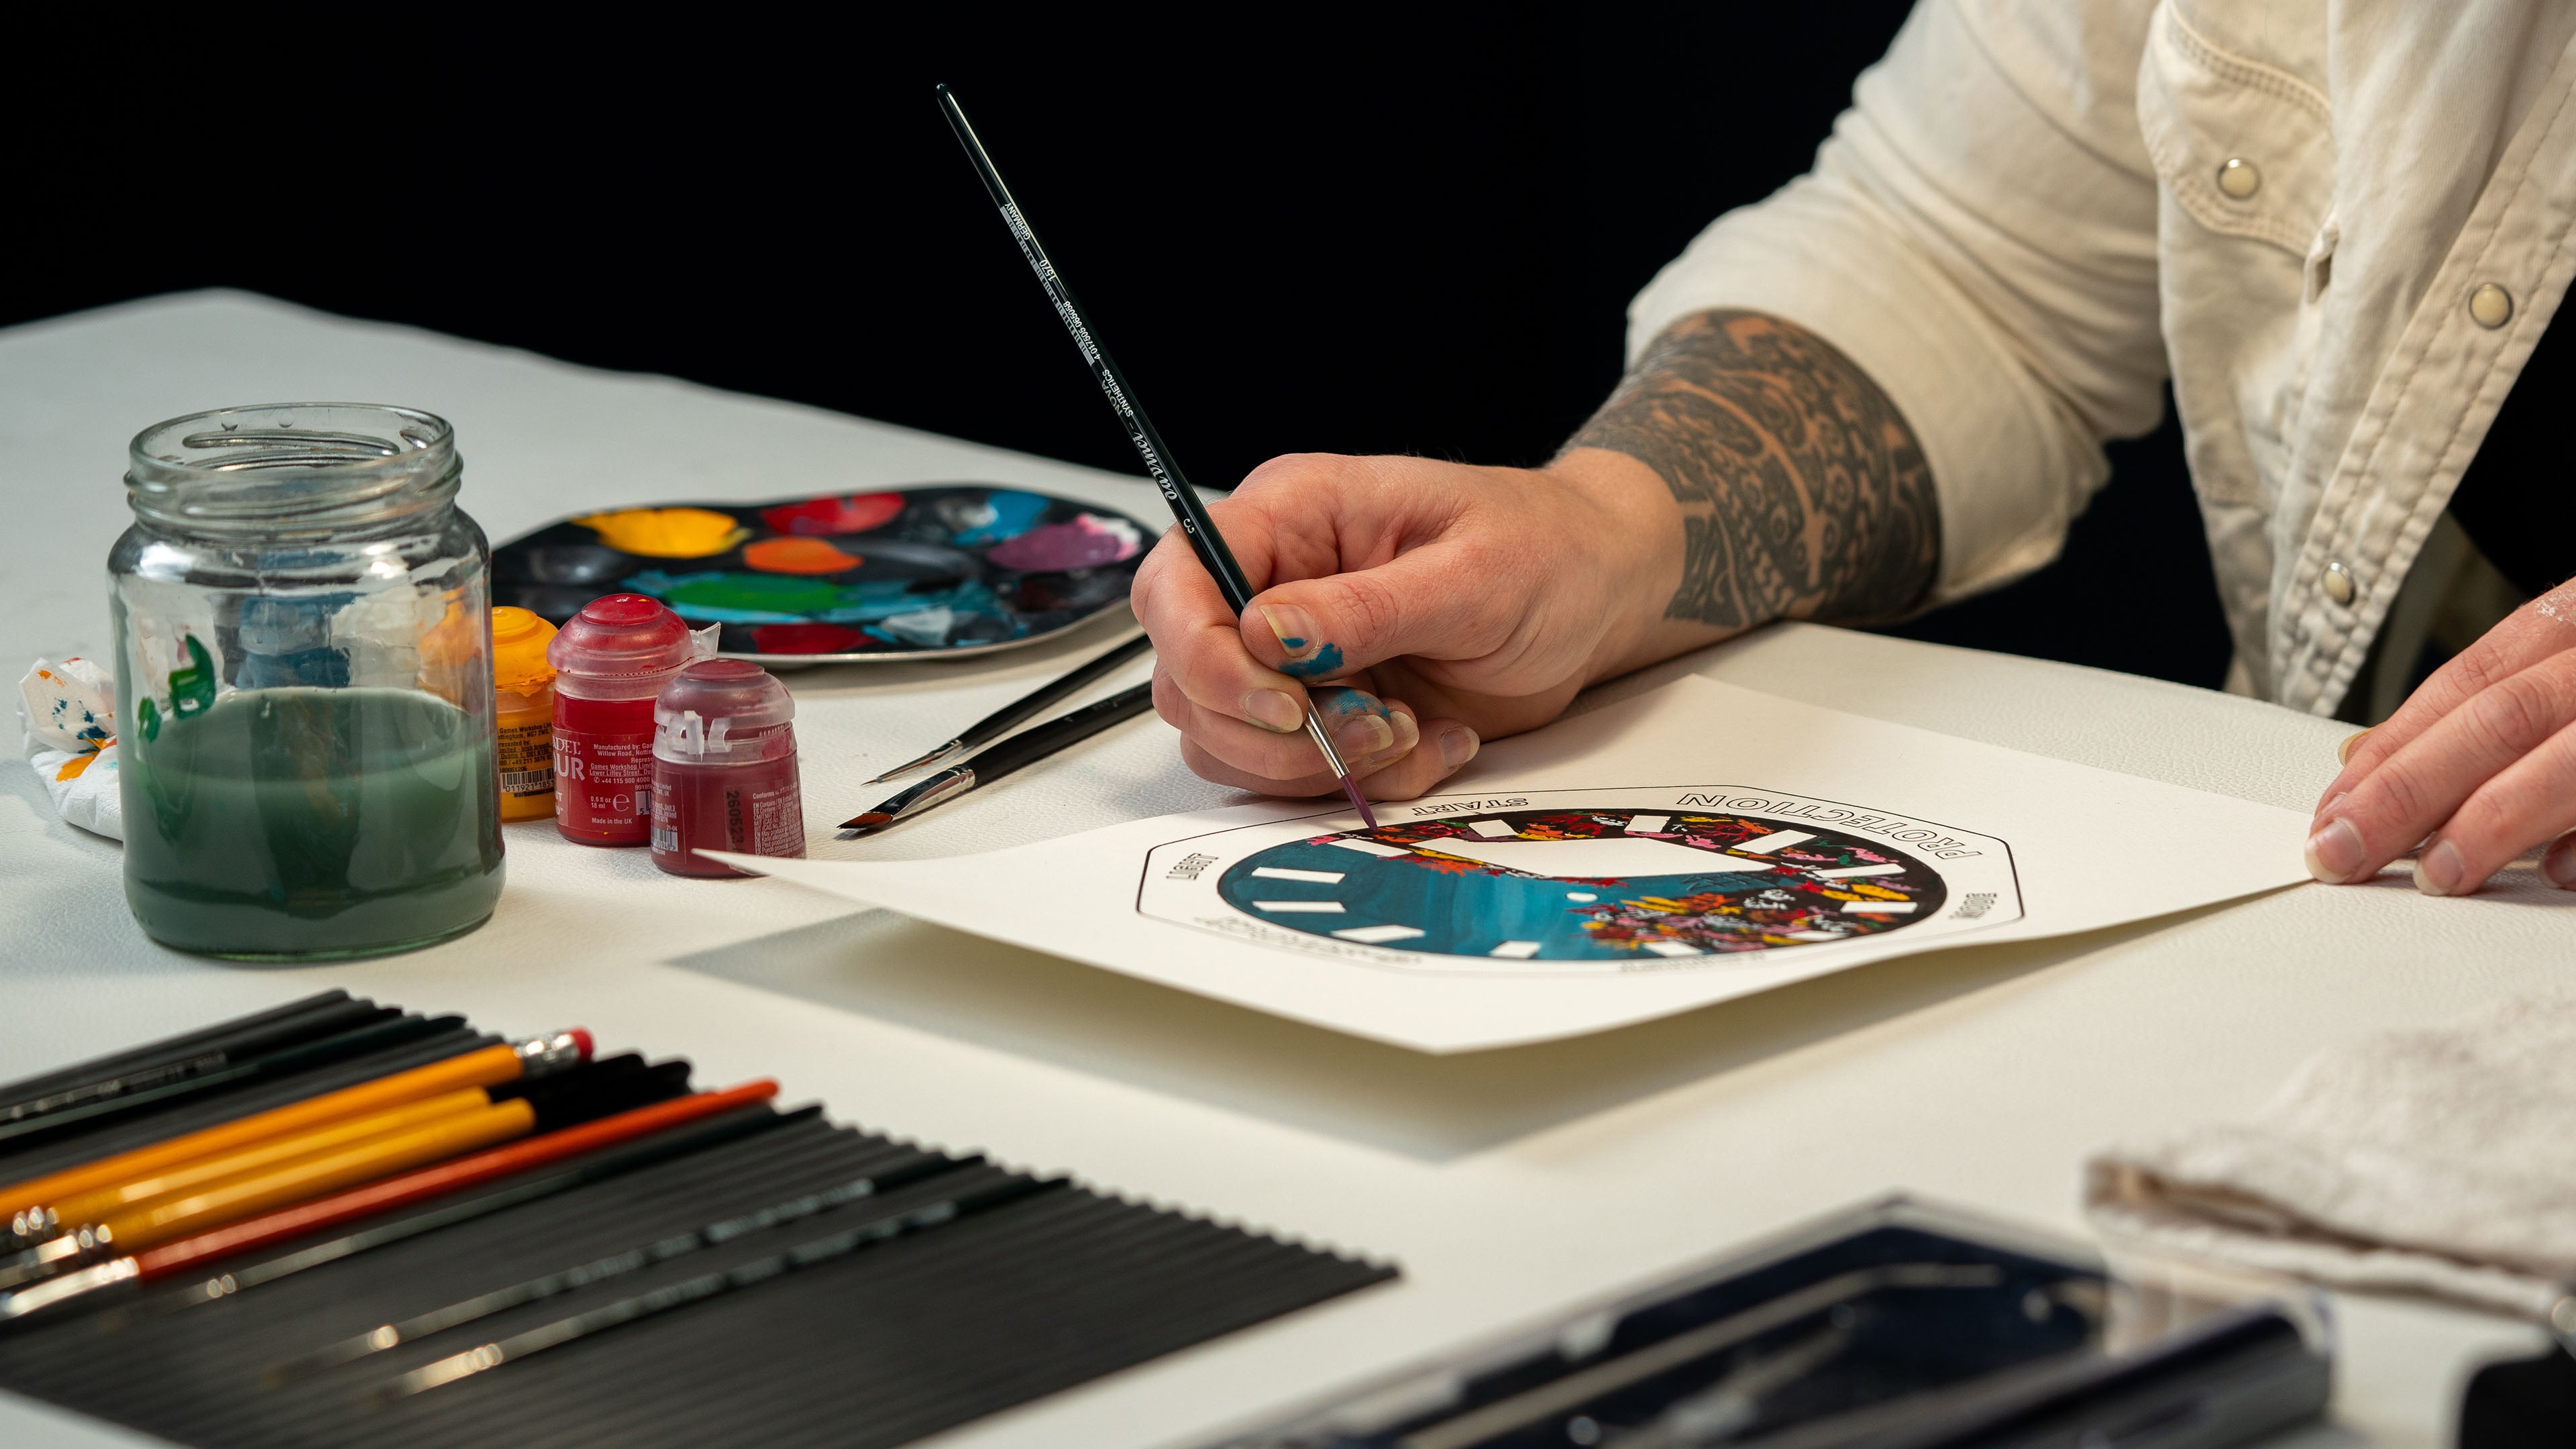 IFL Watches Bespoke Watch Customization Service Hand-Painted Artistic Dial Concepts